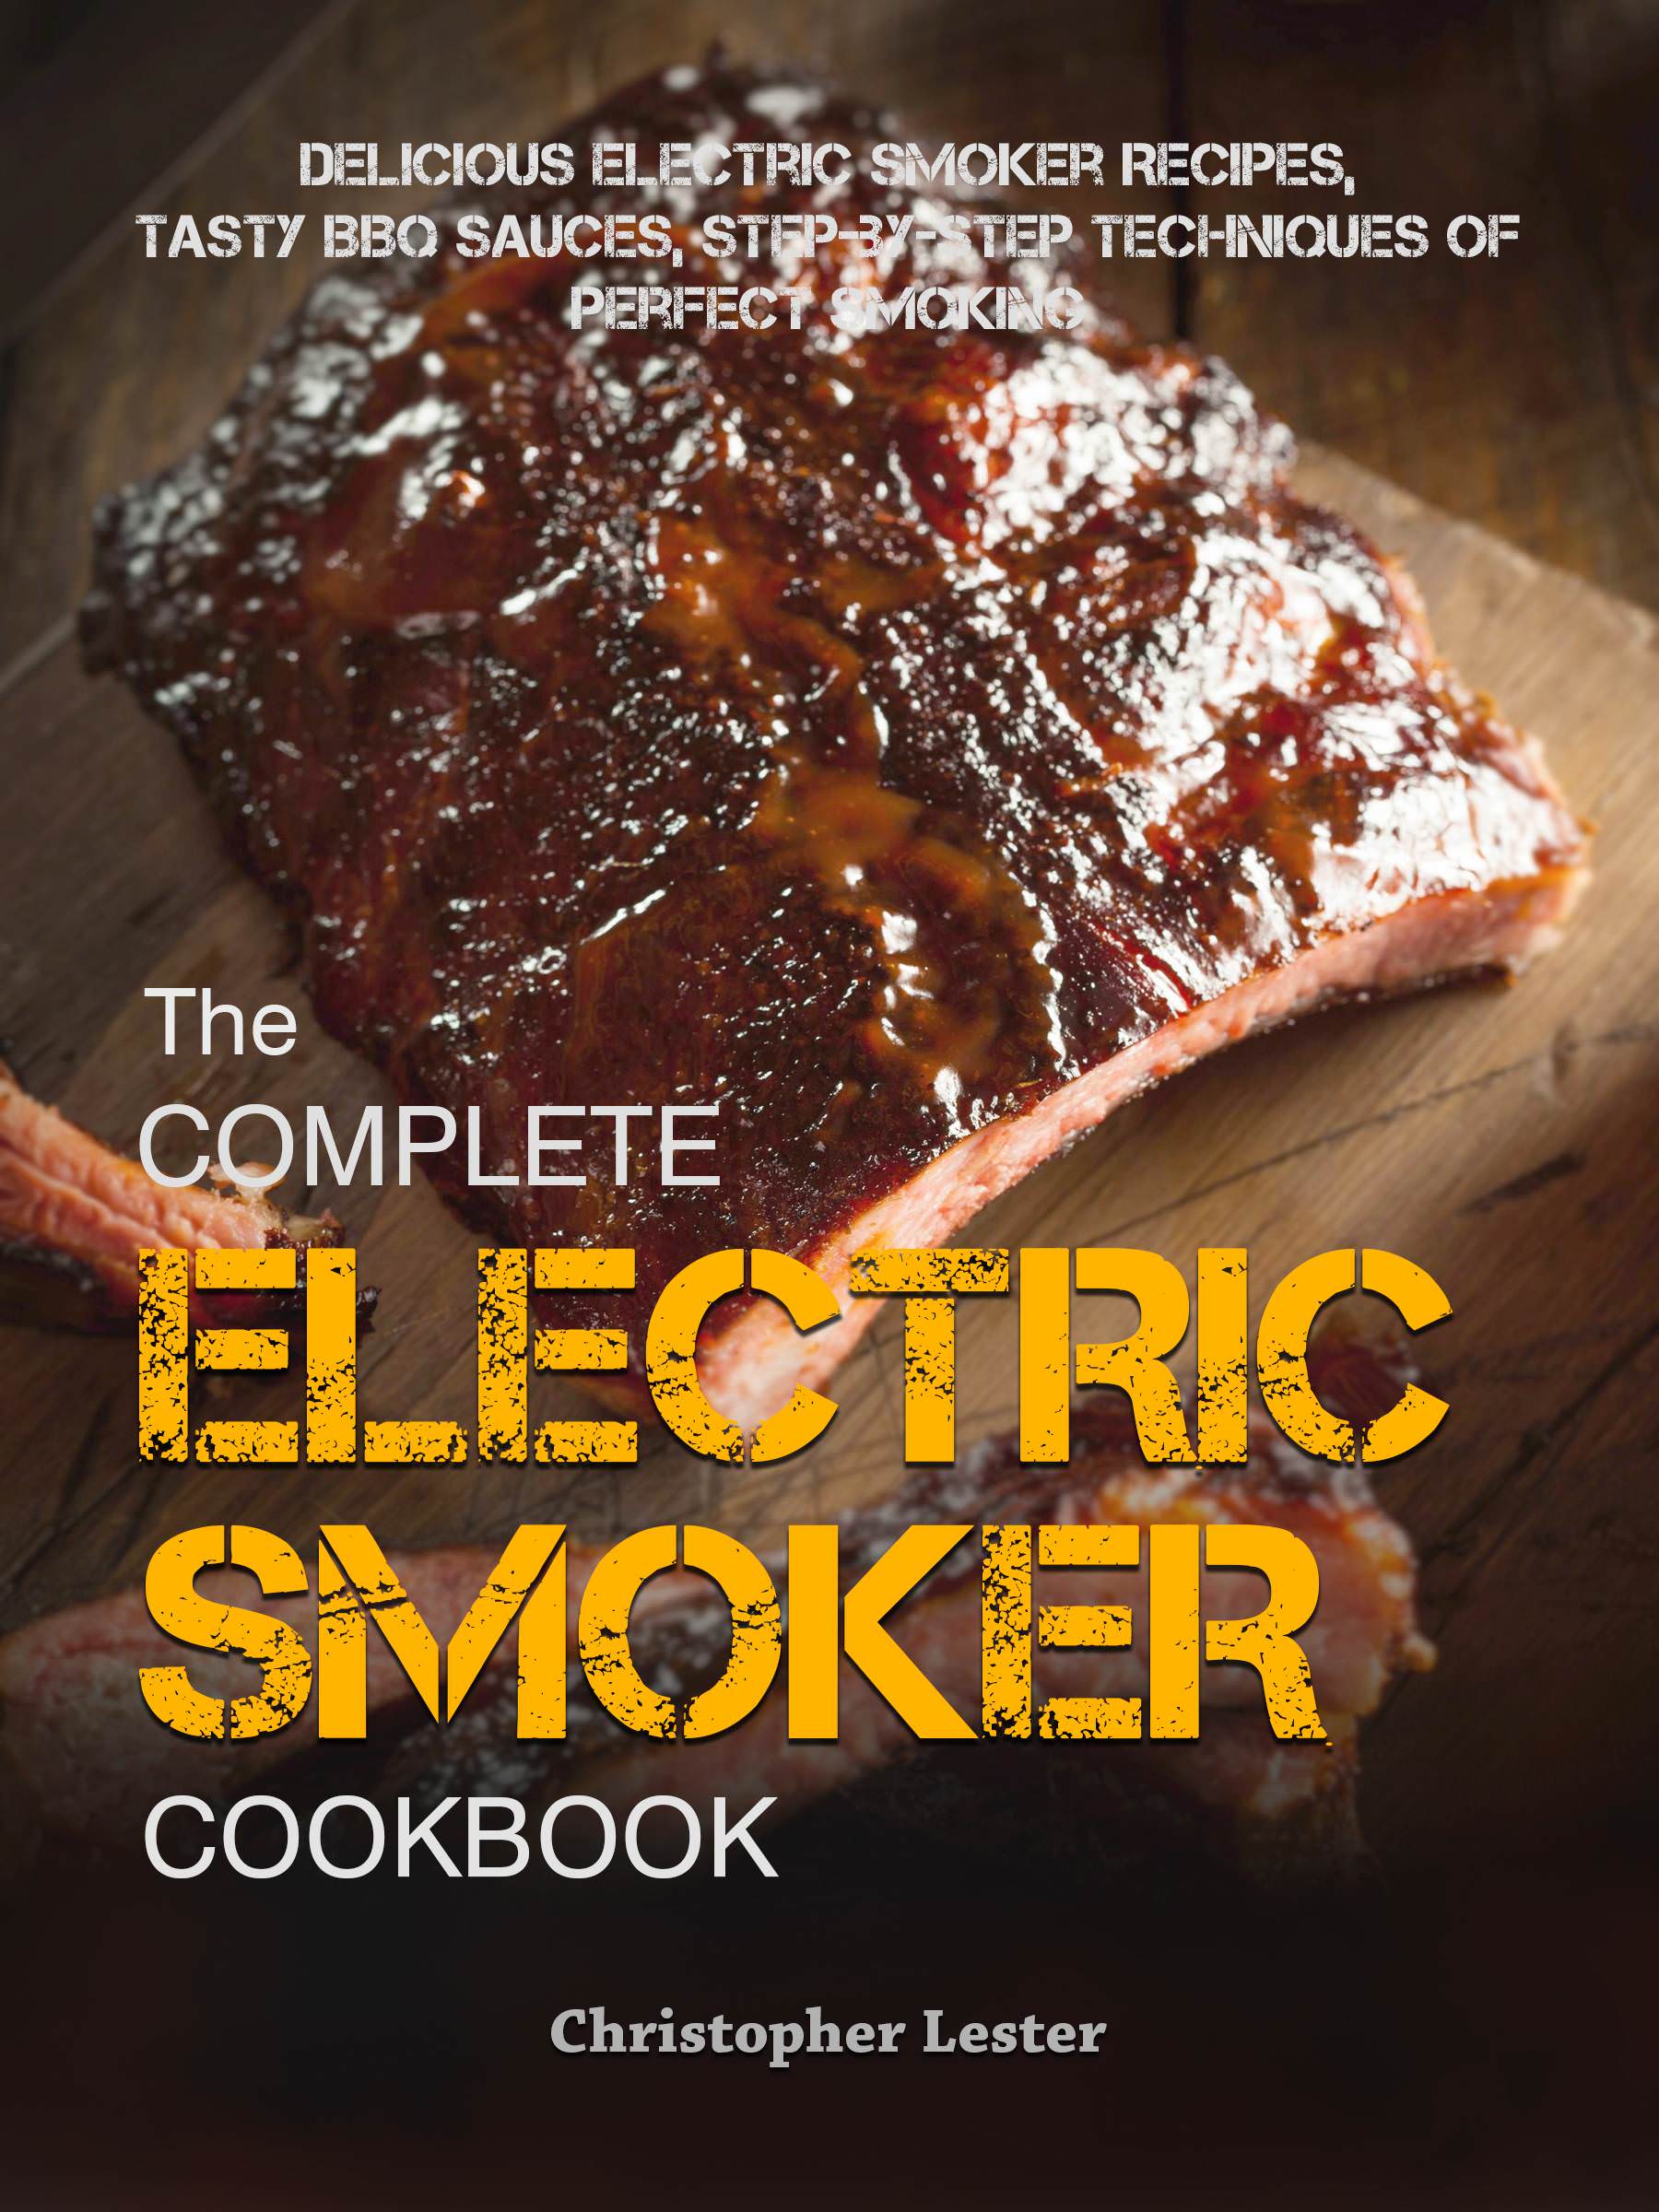 FREE: Complete Electric Smoker Cookbook: Delicious Electric Smoker Recipes, Tasty BBQ Sauces, Step-by-Step Techniques for Perfect Smoking by Christopher Lester